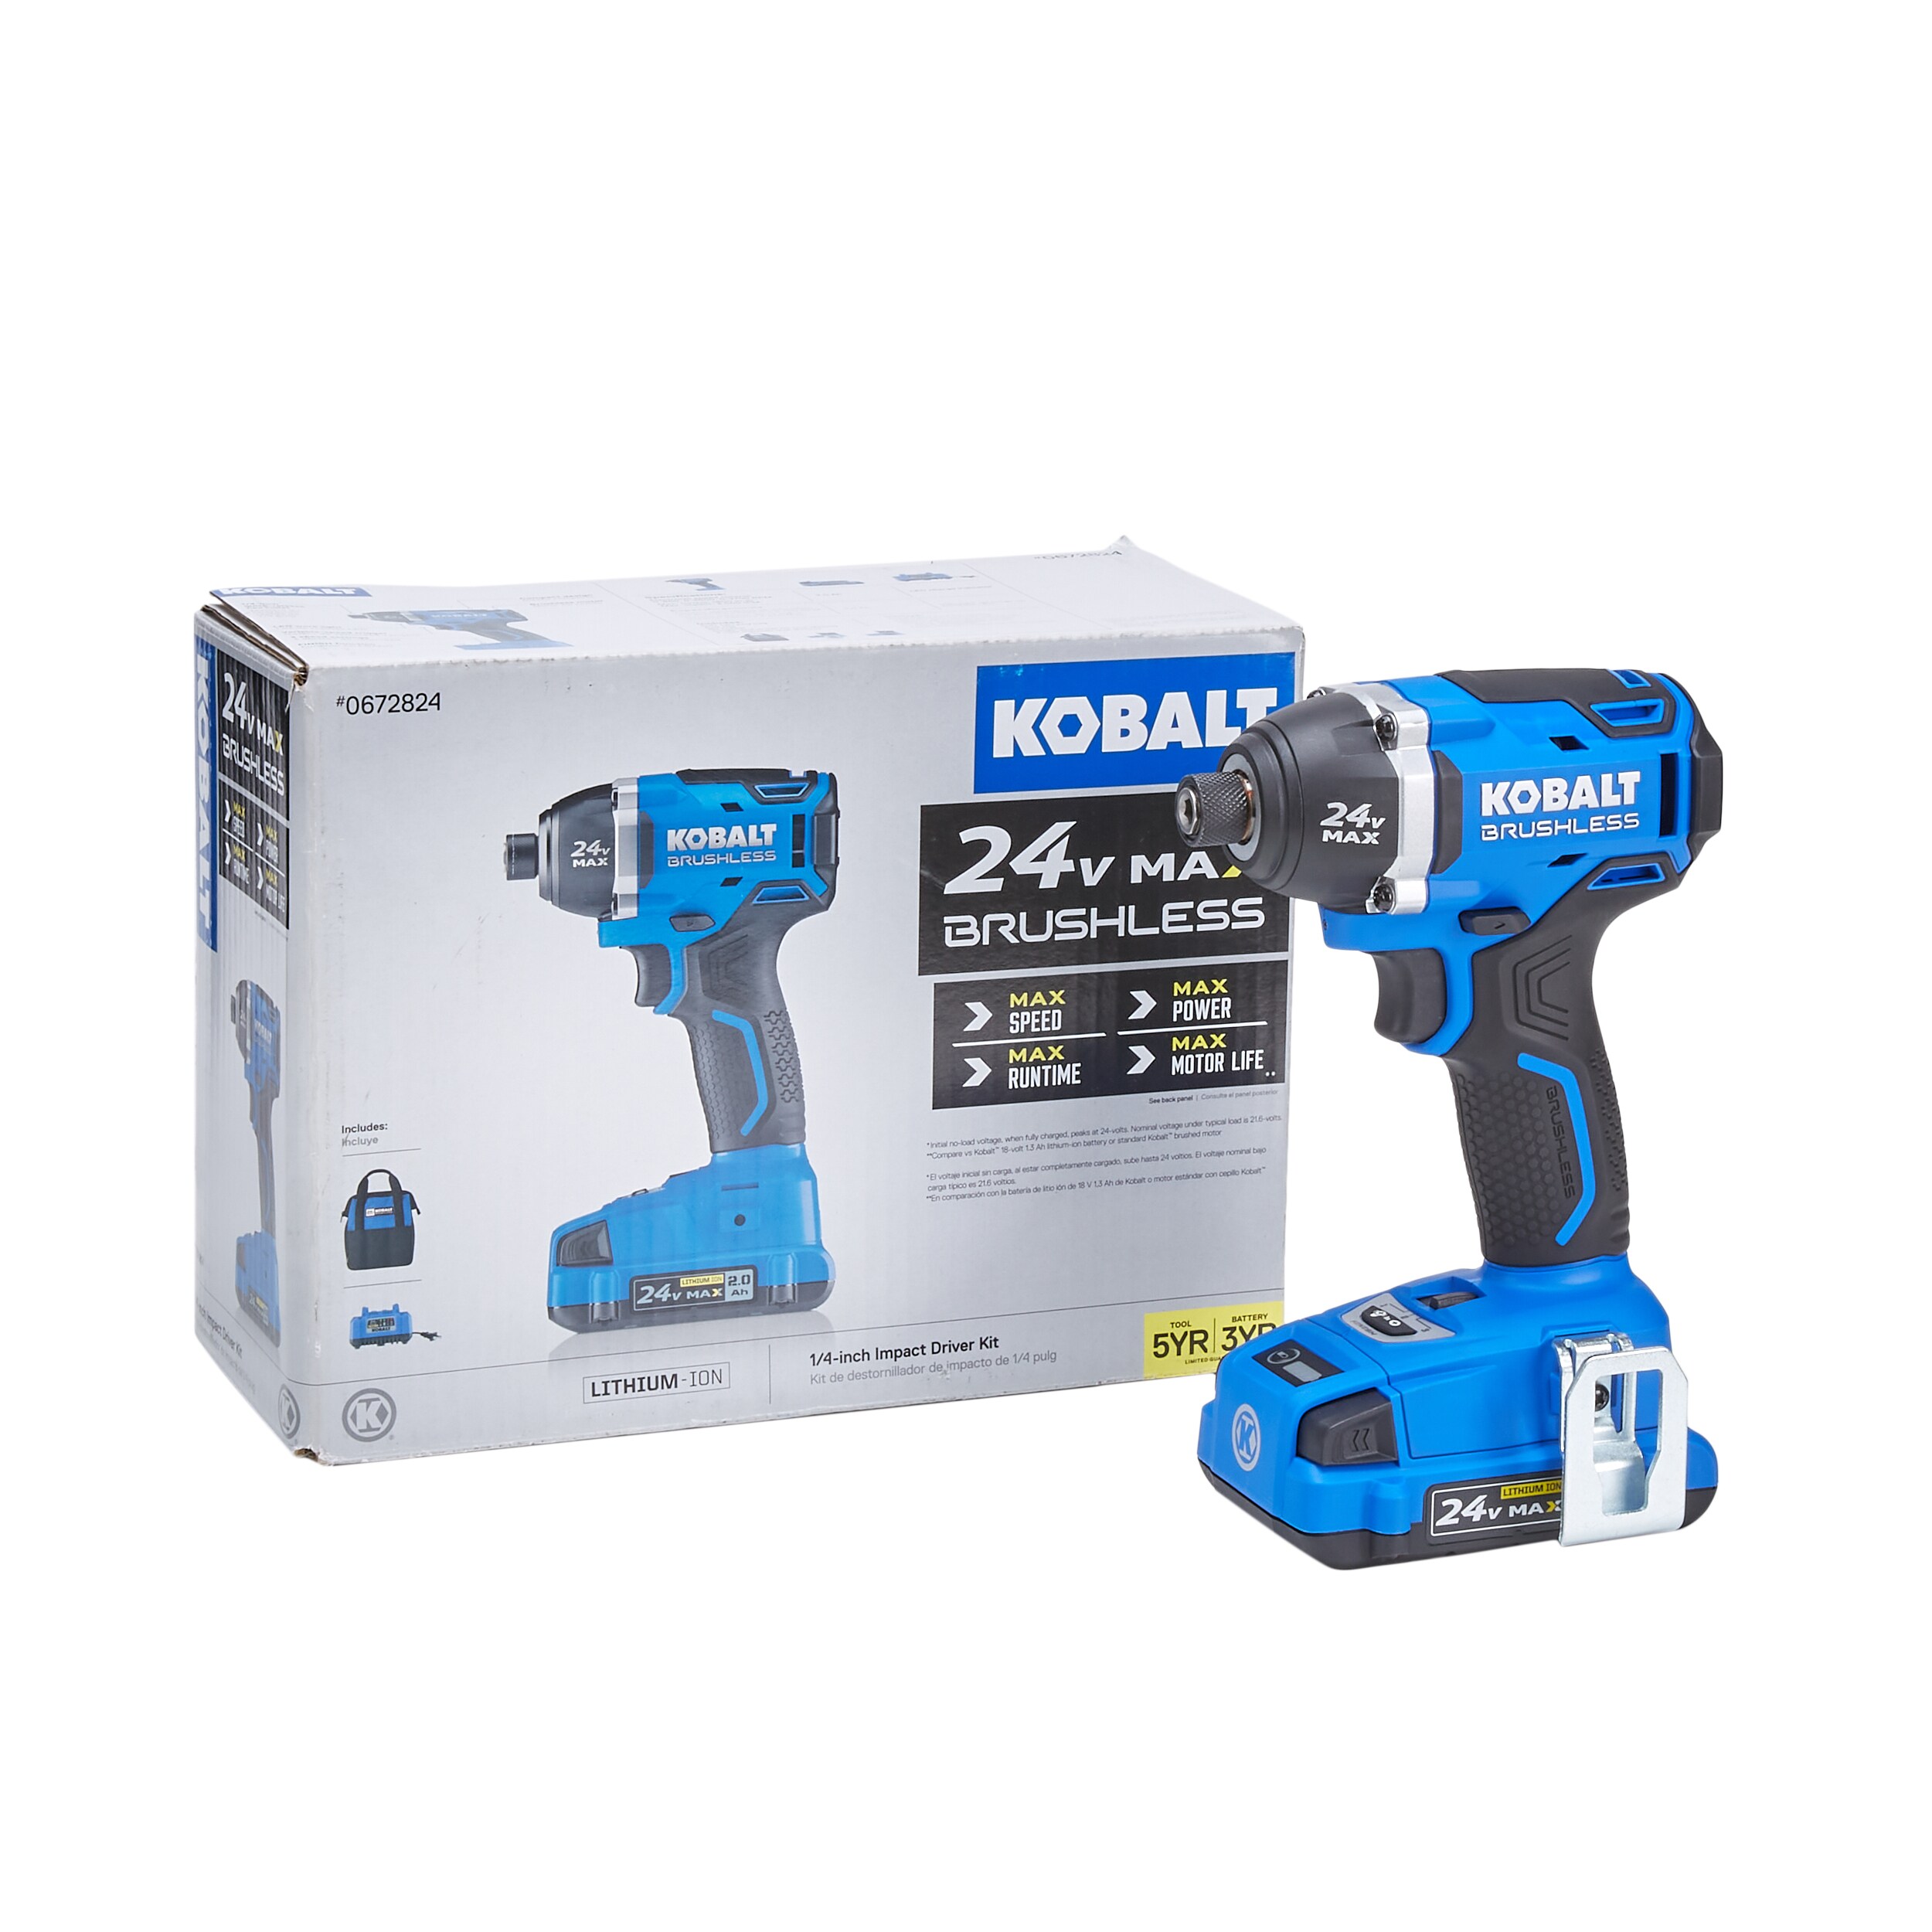 Gear Group With Quick Release Off Kobalt 324B-03 24V Max Impact Driver Drill 